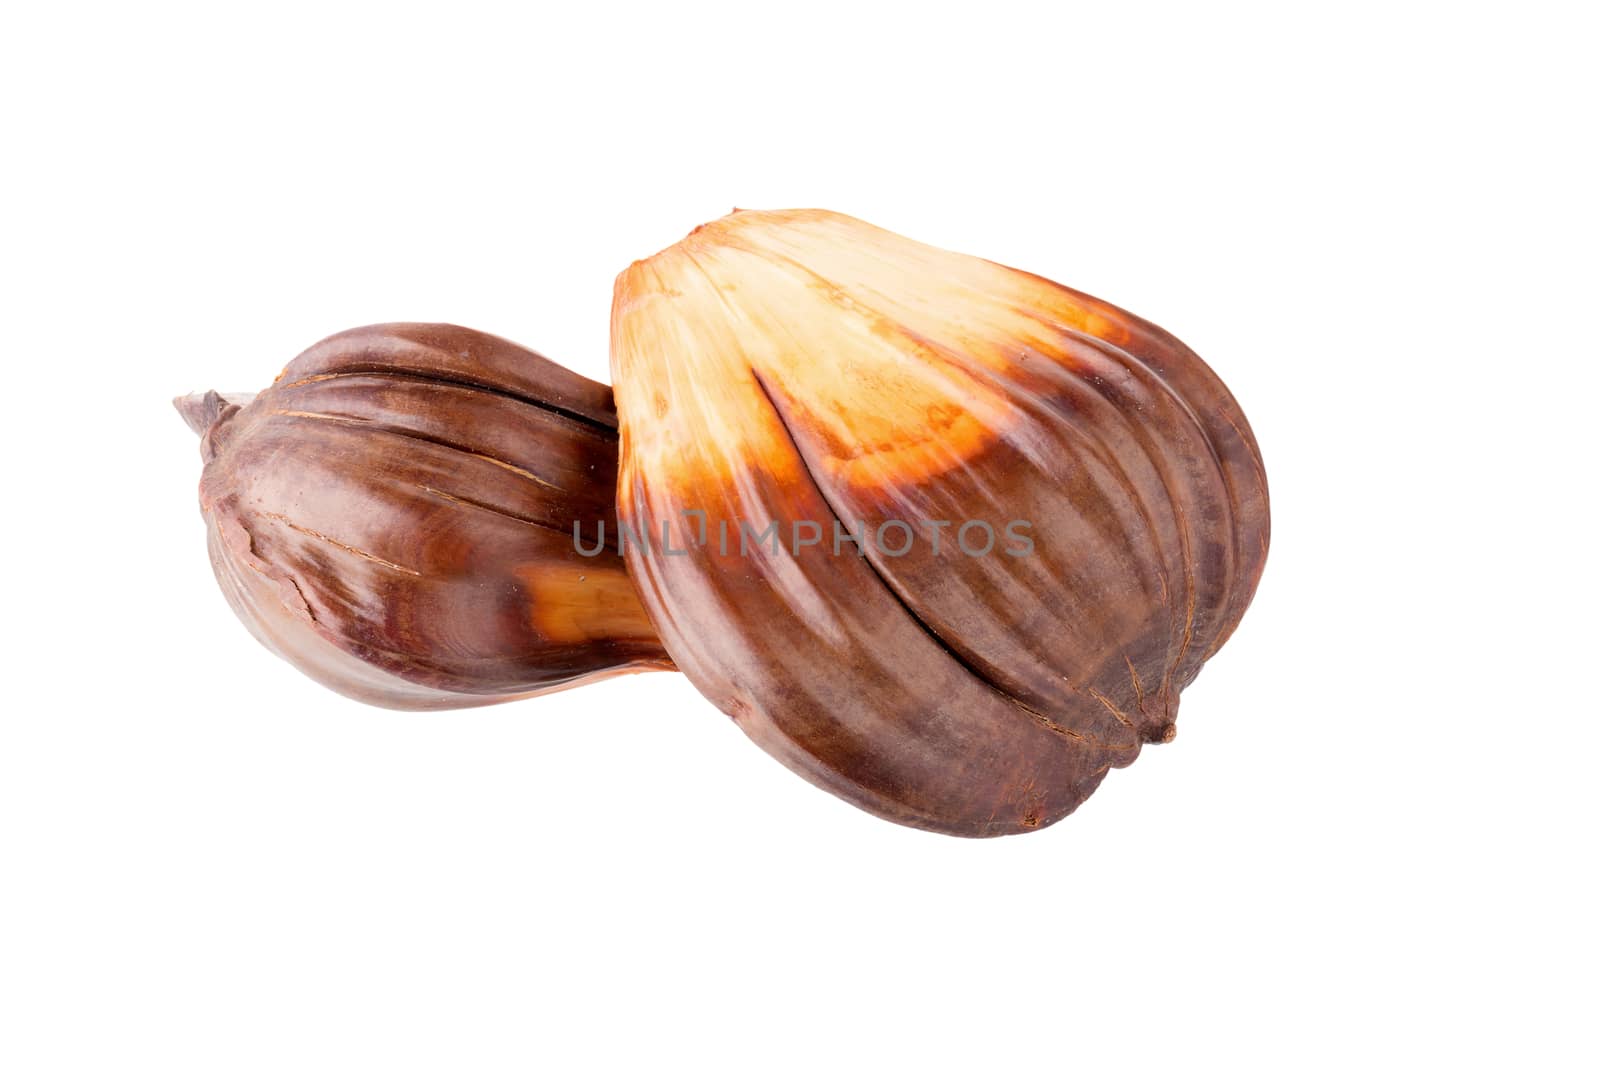 nypa palm fruit in Thailand, close up of nypa seed isolated on white background.